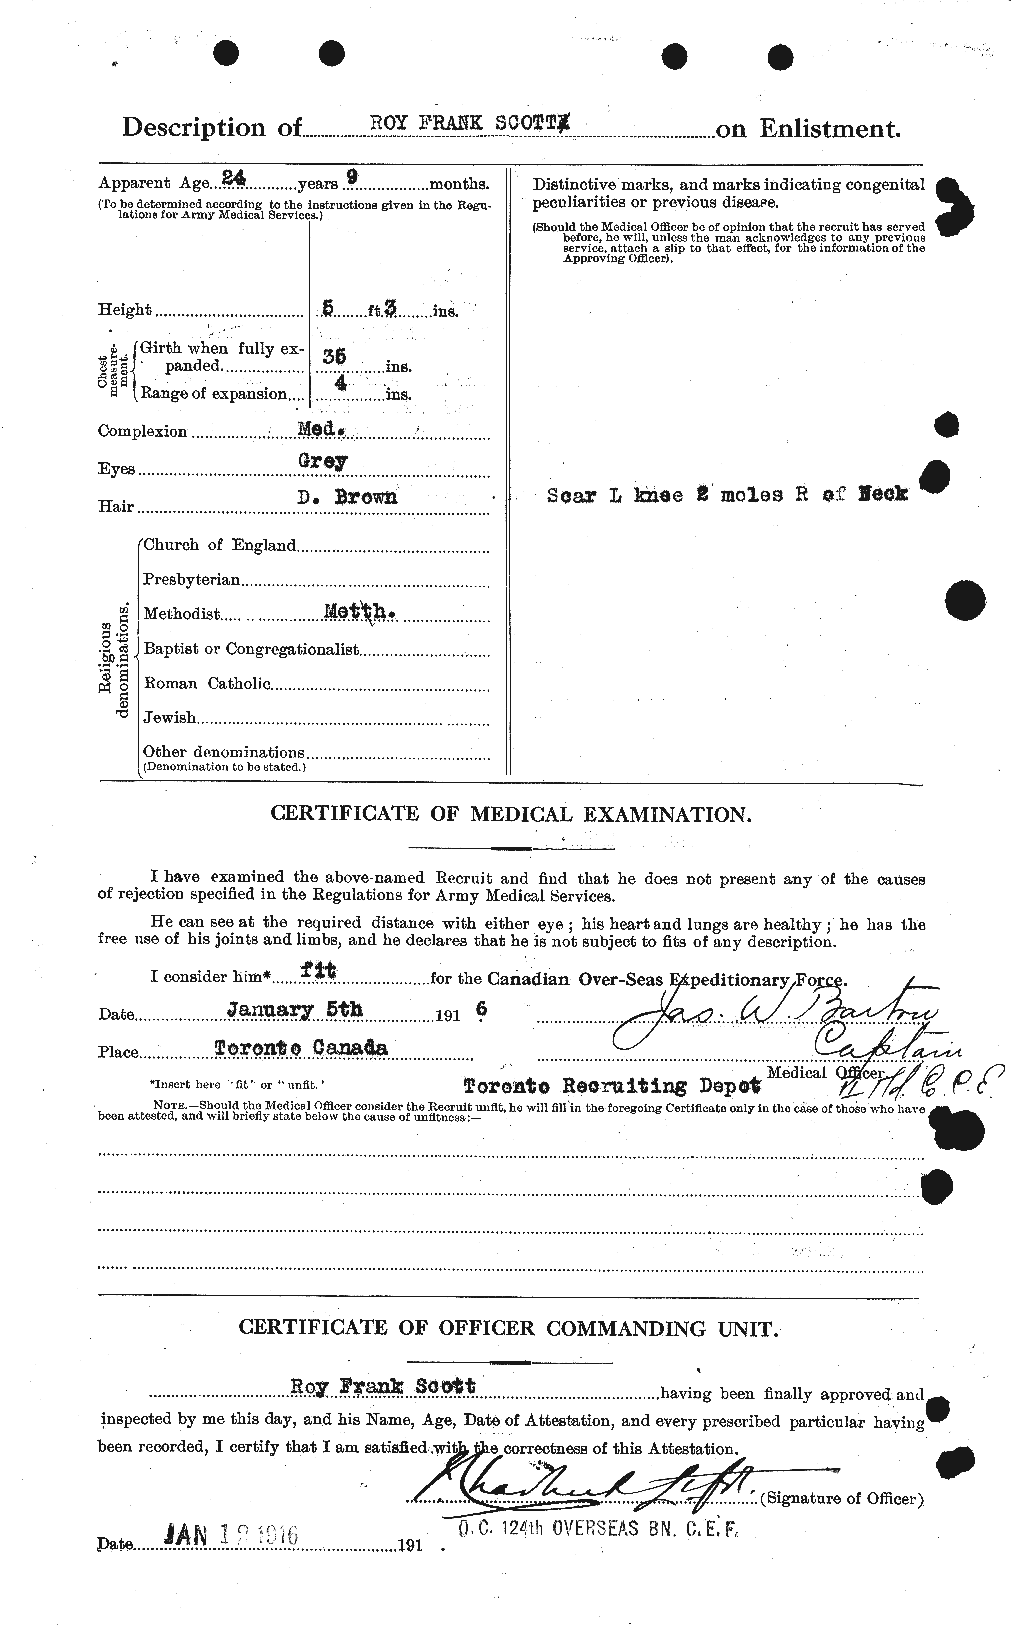 Personnel Records of the First World War - CEF 088882b